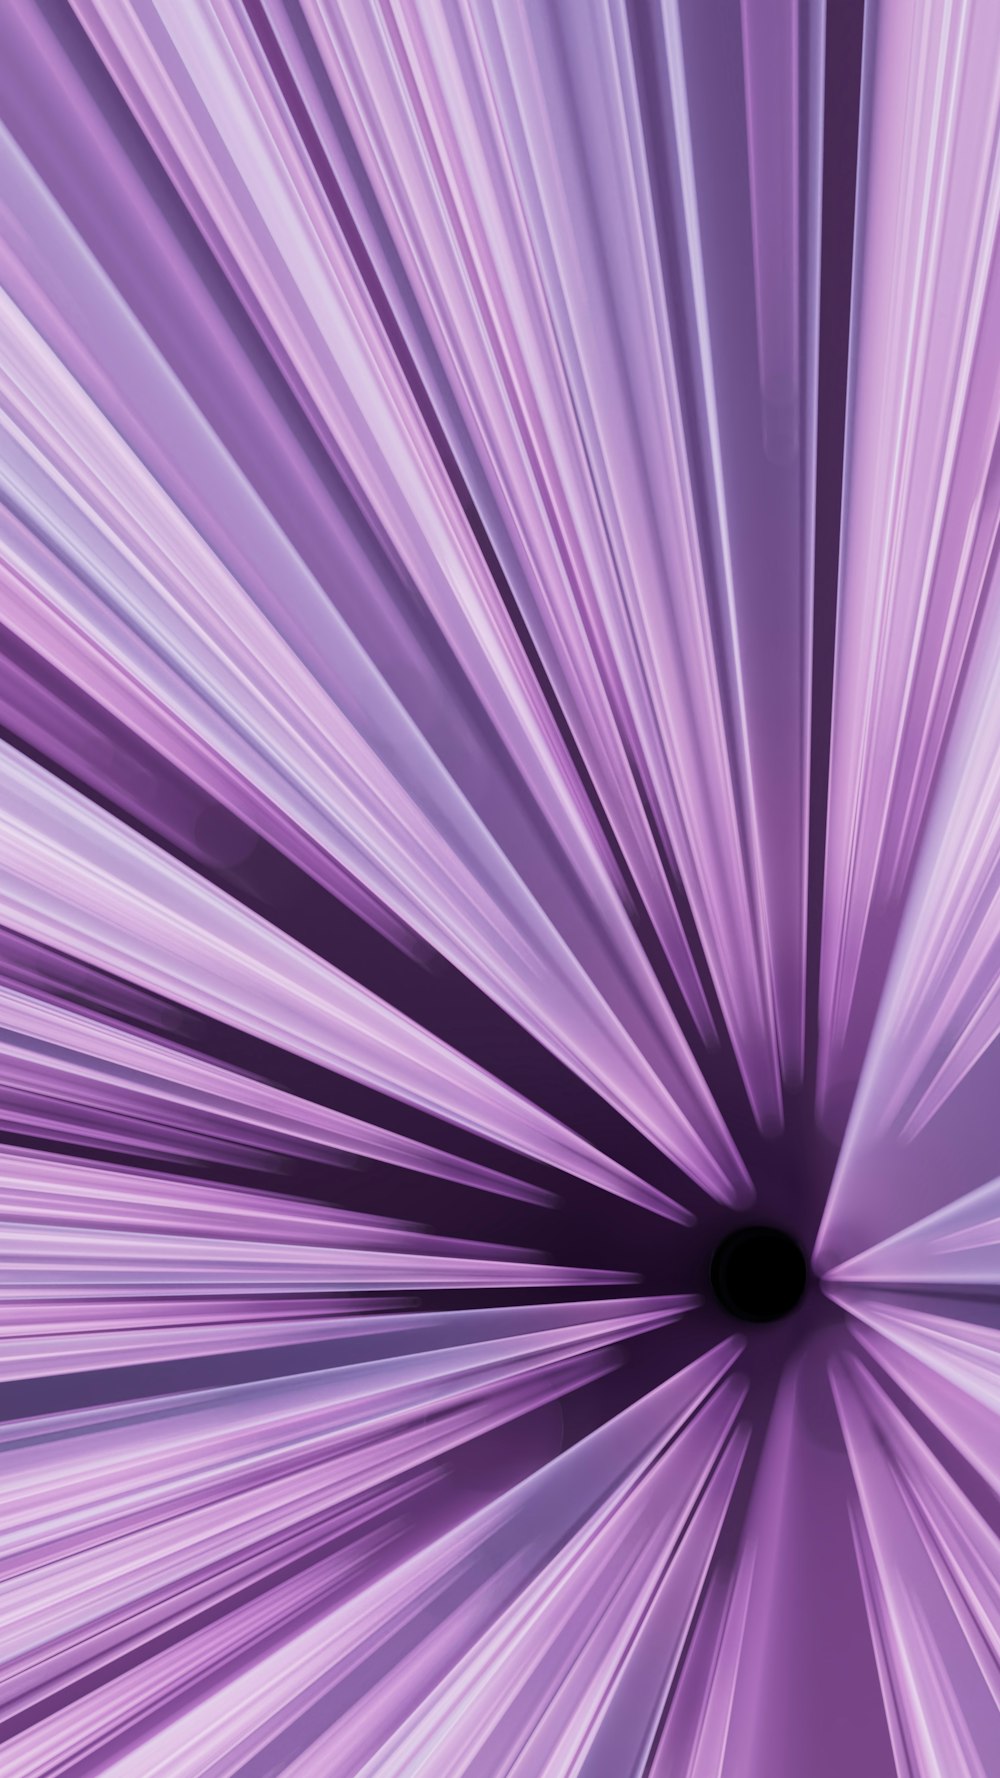 a purple abstract background with a black center